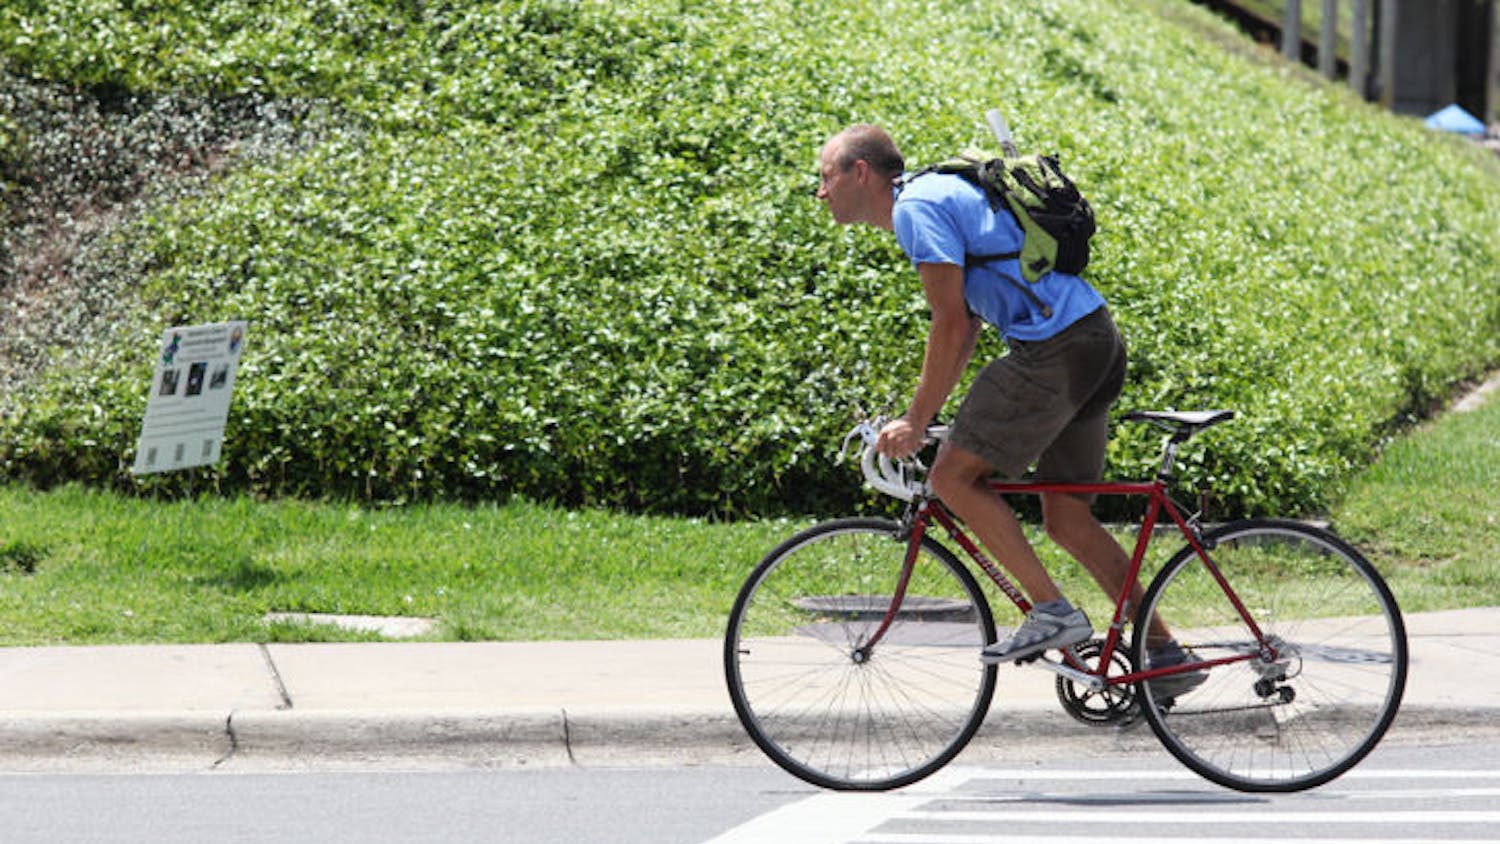 A commuter rides his bike east on Museum Road on Monday afternoon. A new study shows that biking to work can be healthier than regular exercise.